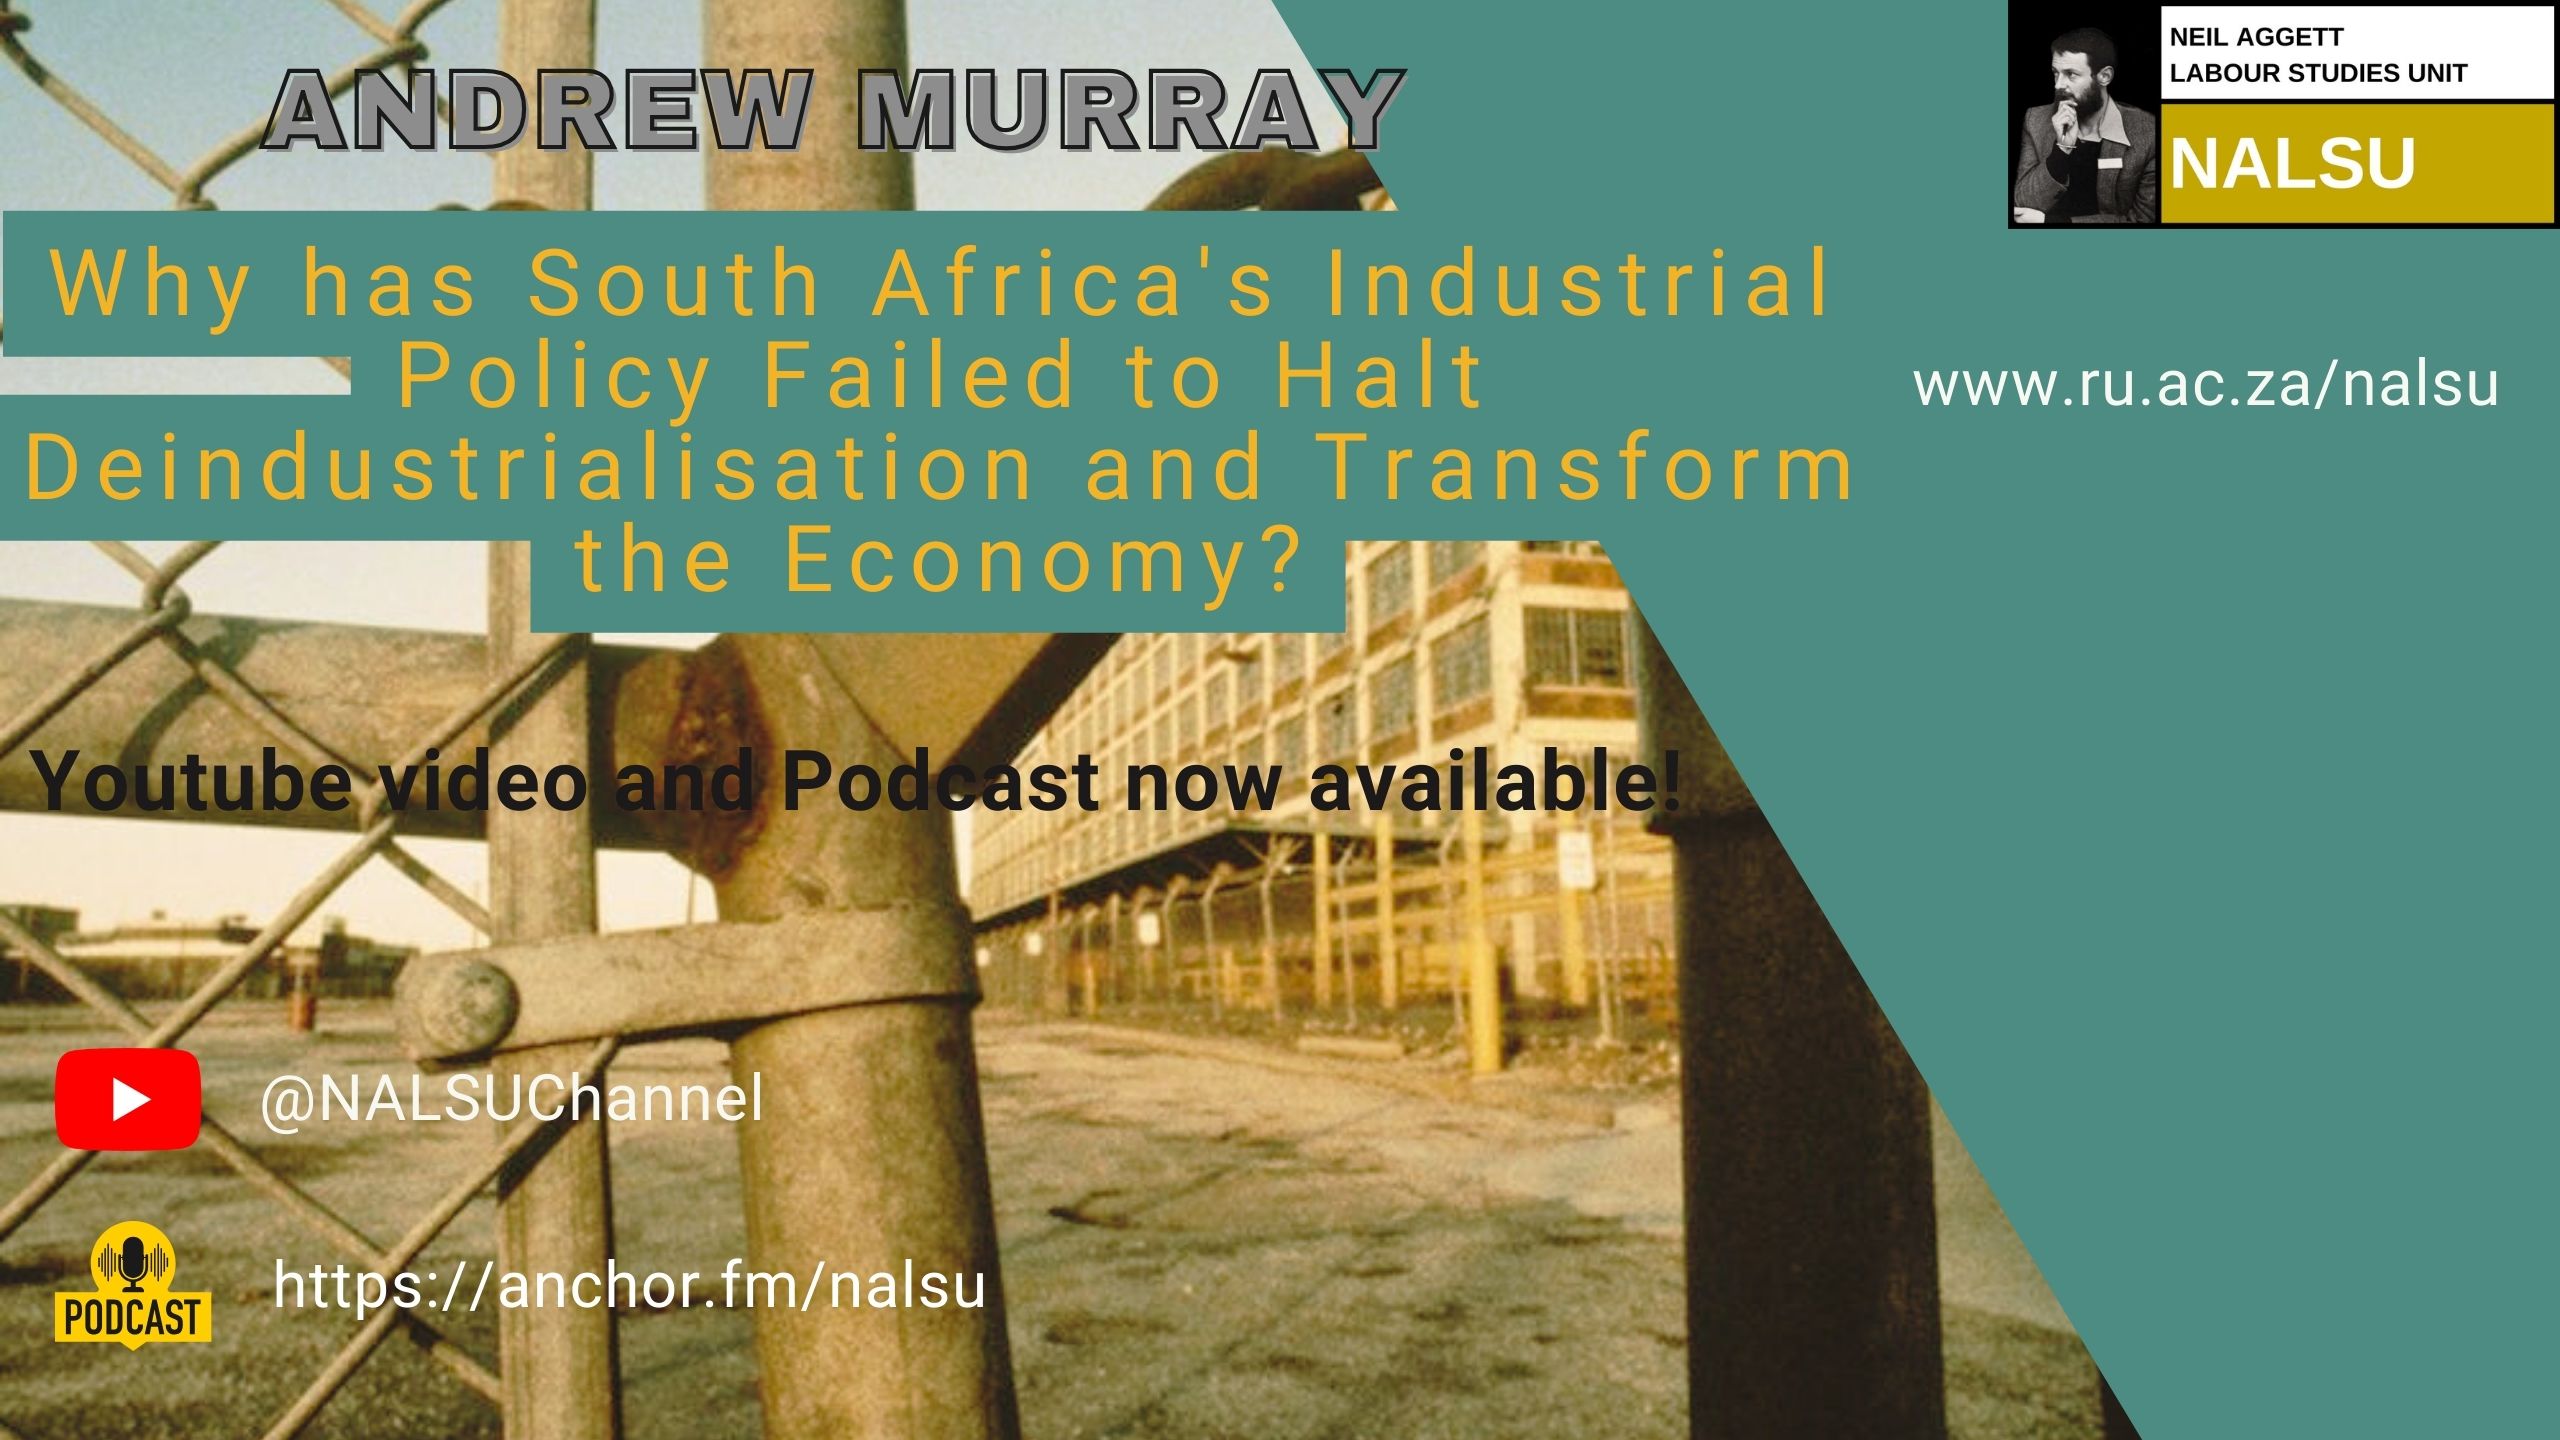 Labour Studies Podcast/Video: Andrew Murray | "Why has South Africa's Industrial Policy Failed to Halt Deindustrialisation and Transform the Economy?"